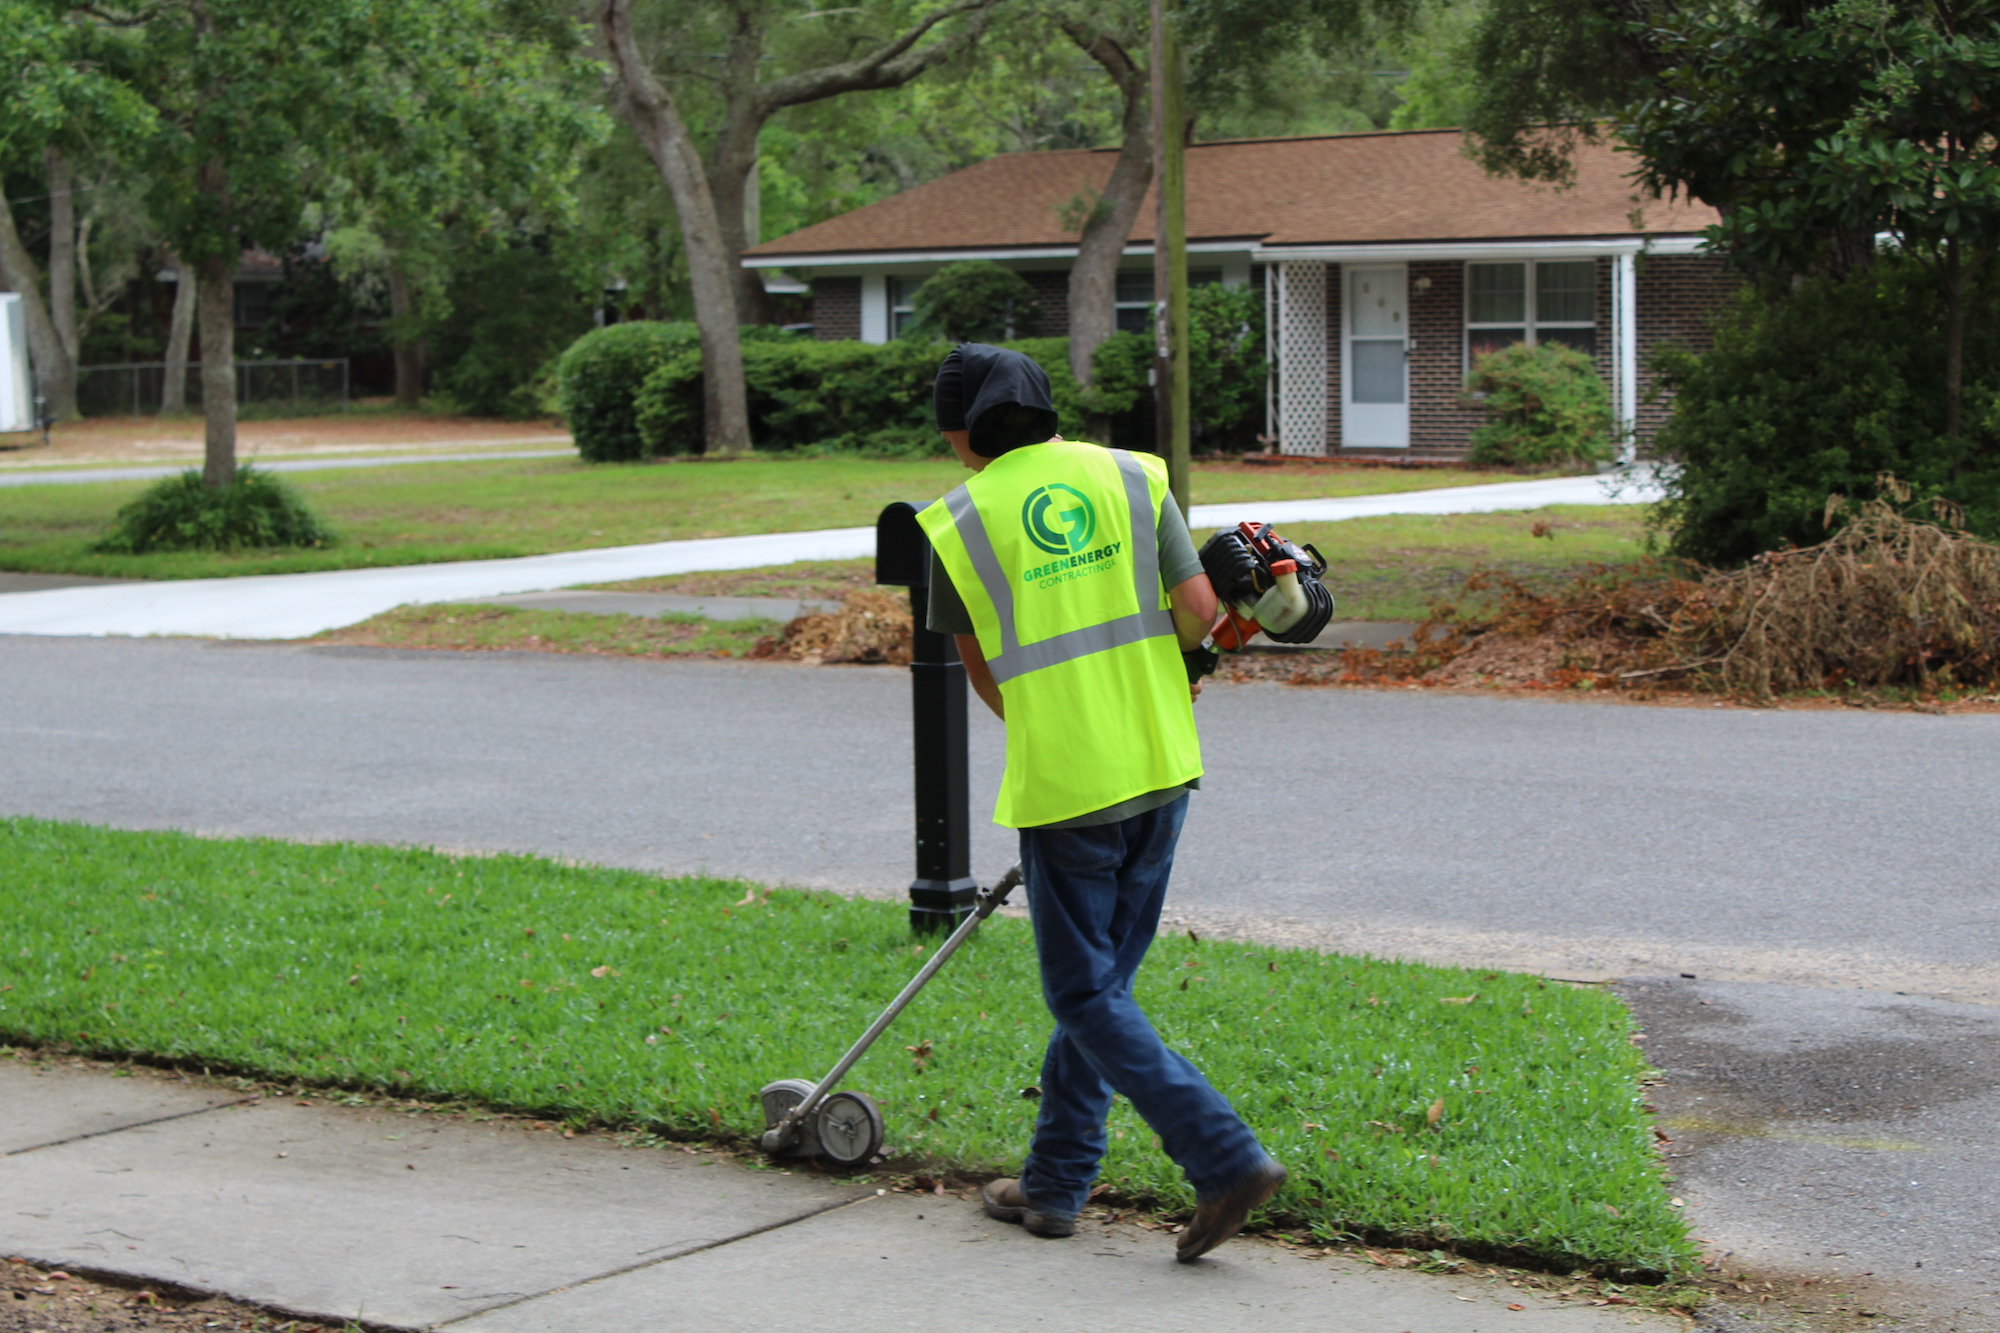 Green Energy Landscaping employee edge trimming lawn against sidewalk, wearing bright green safety vest with GEL logo